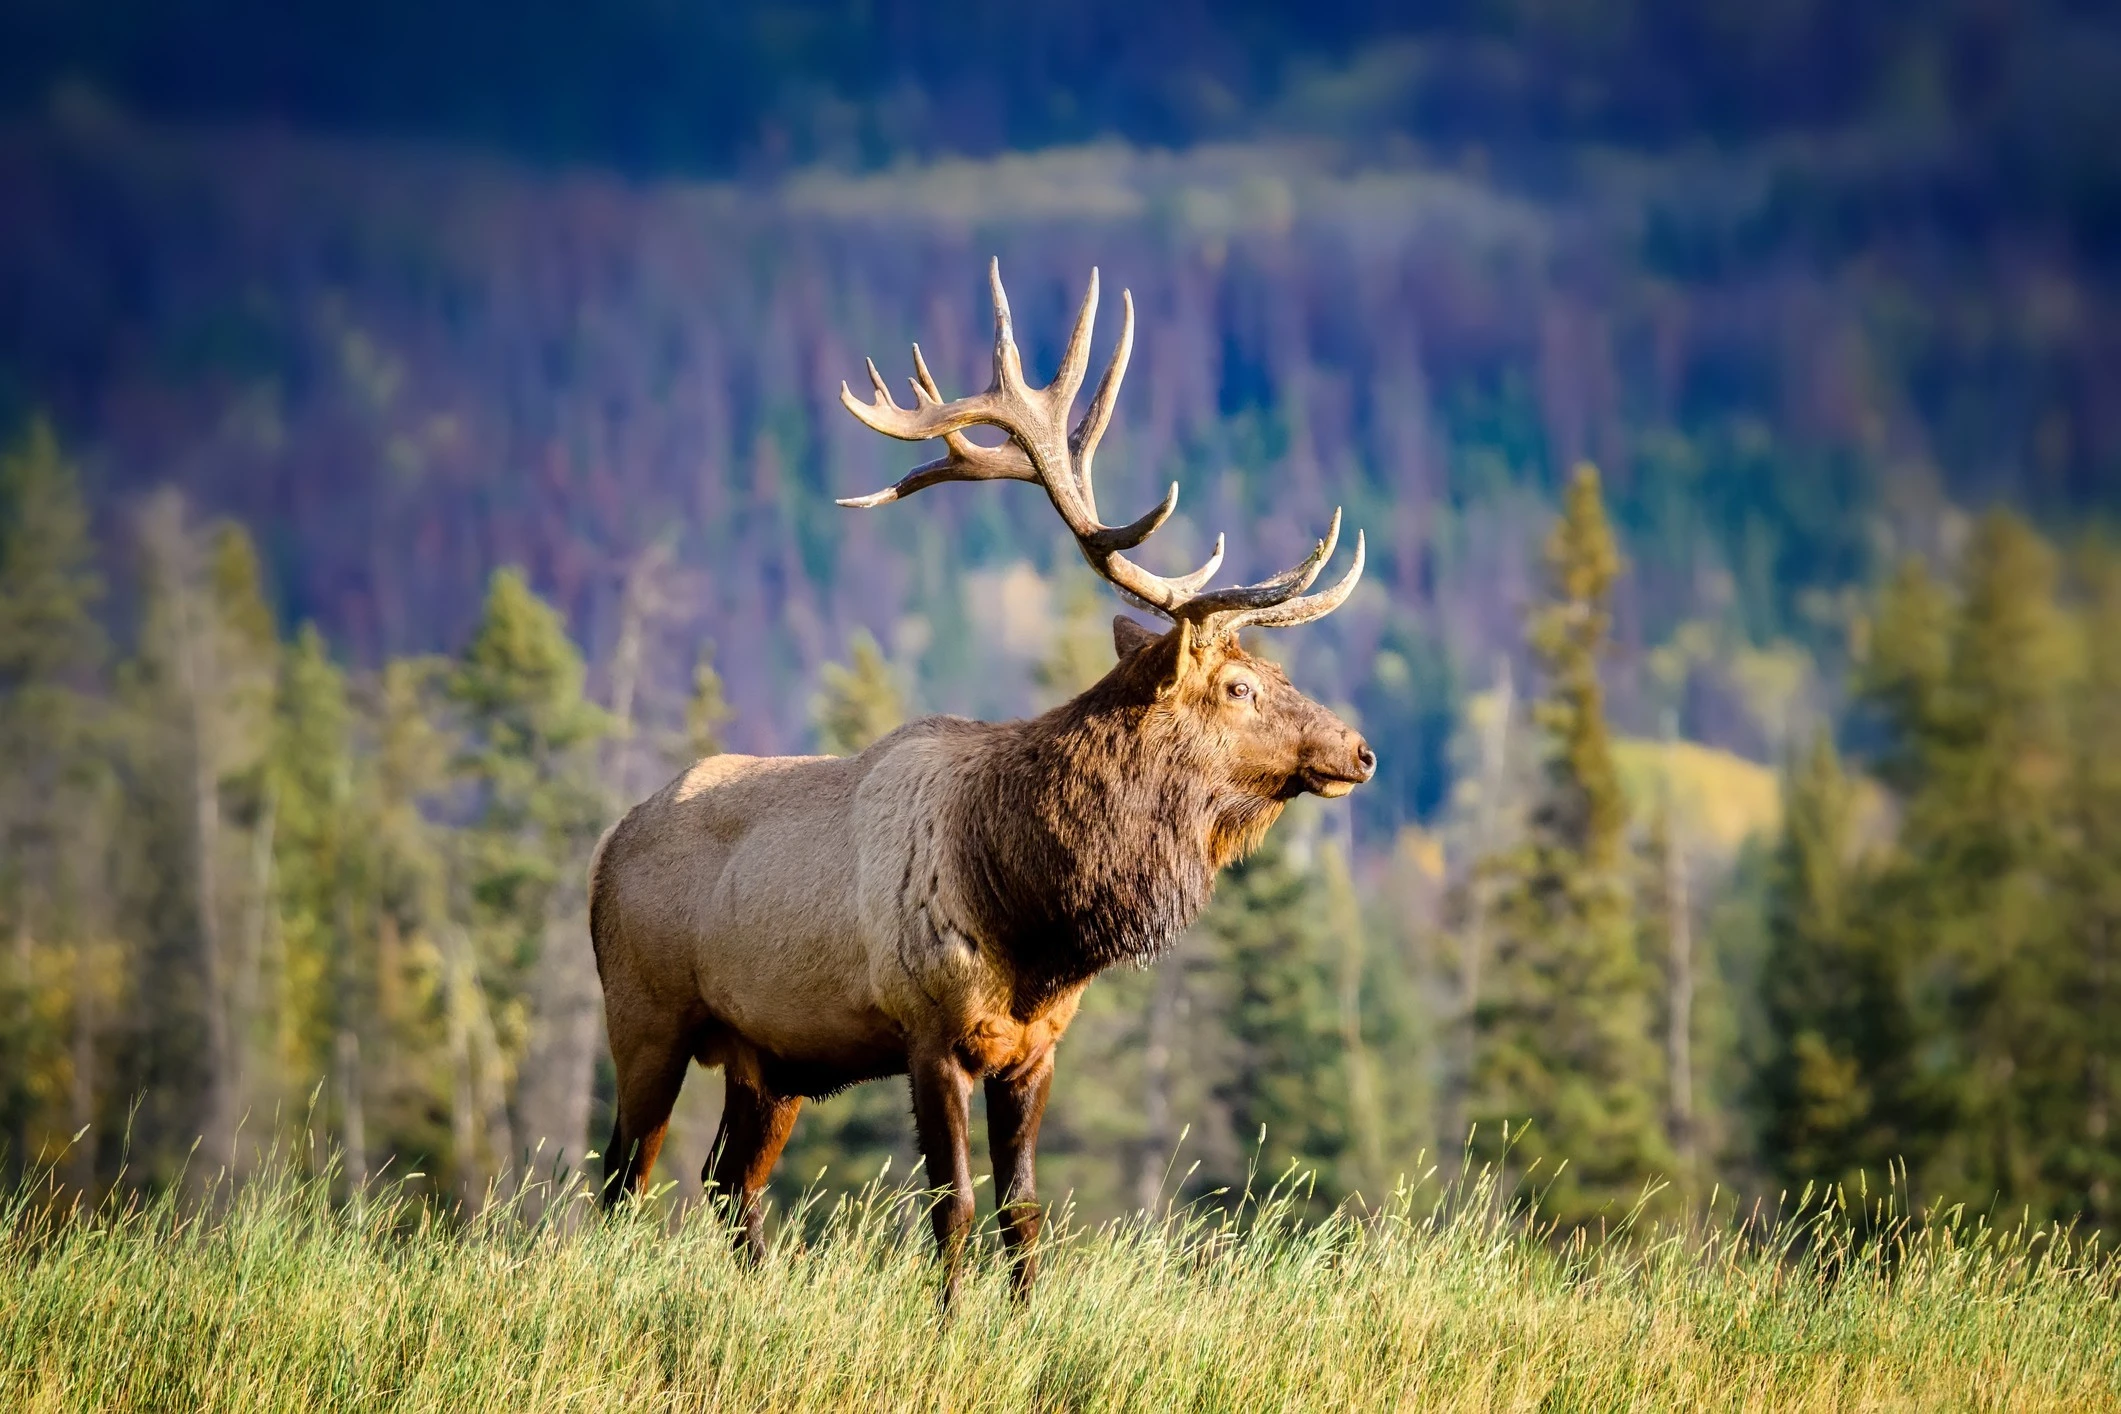 The Ultimate Guide to Canadian Wildlife: Where to See Iconic Animals